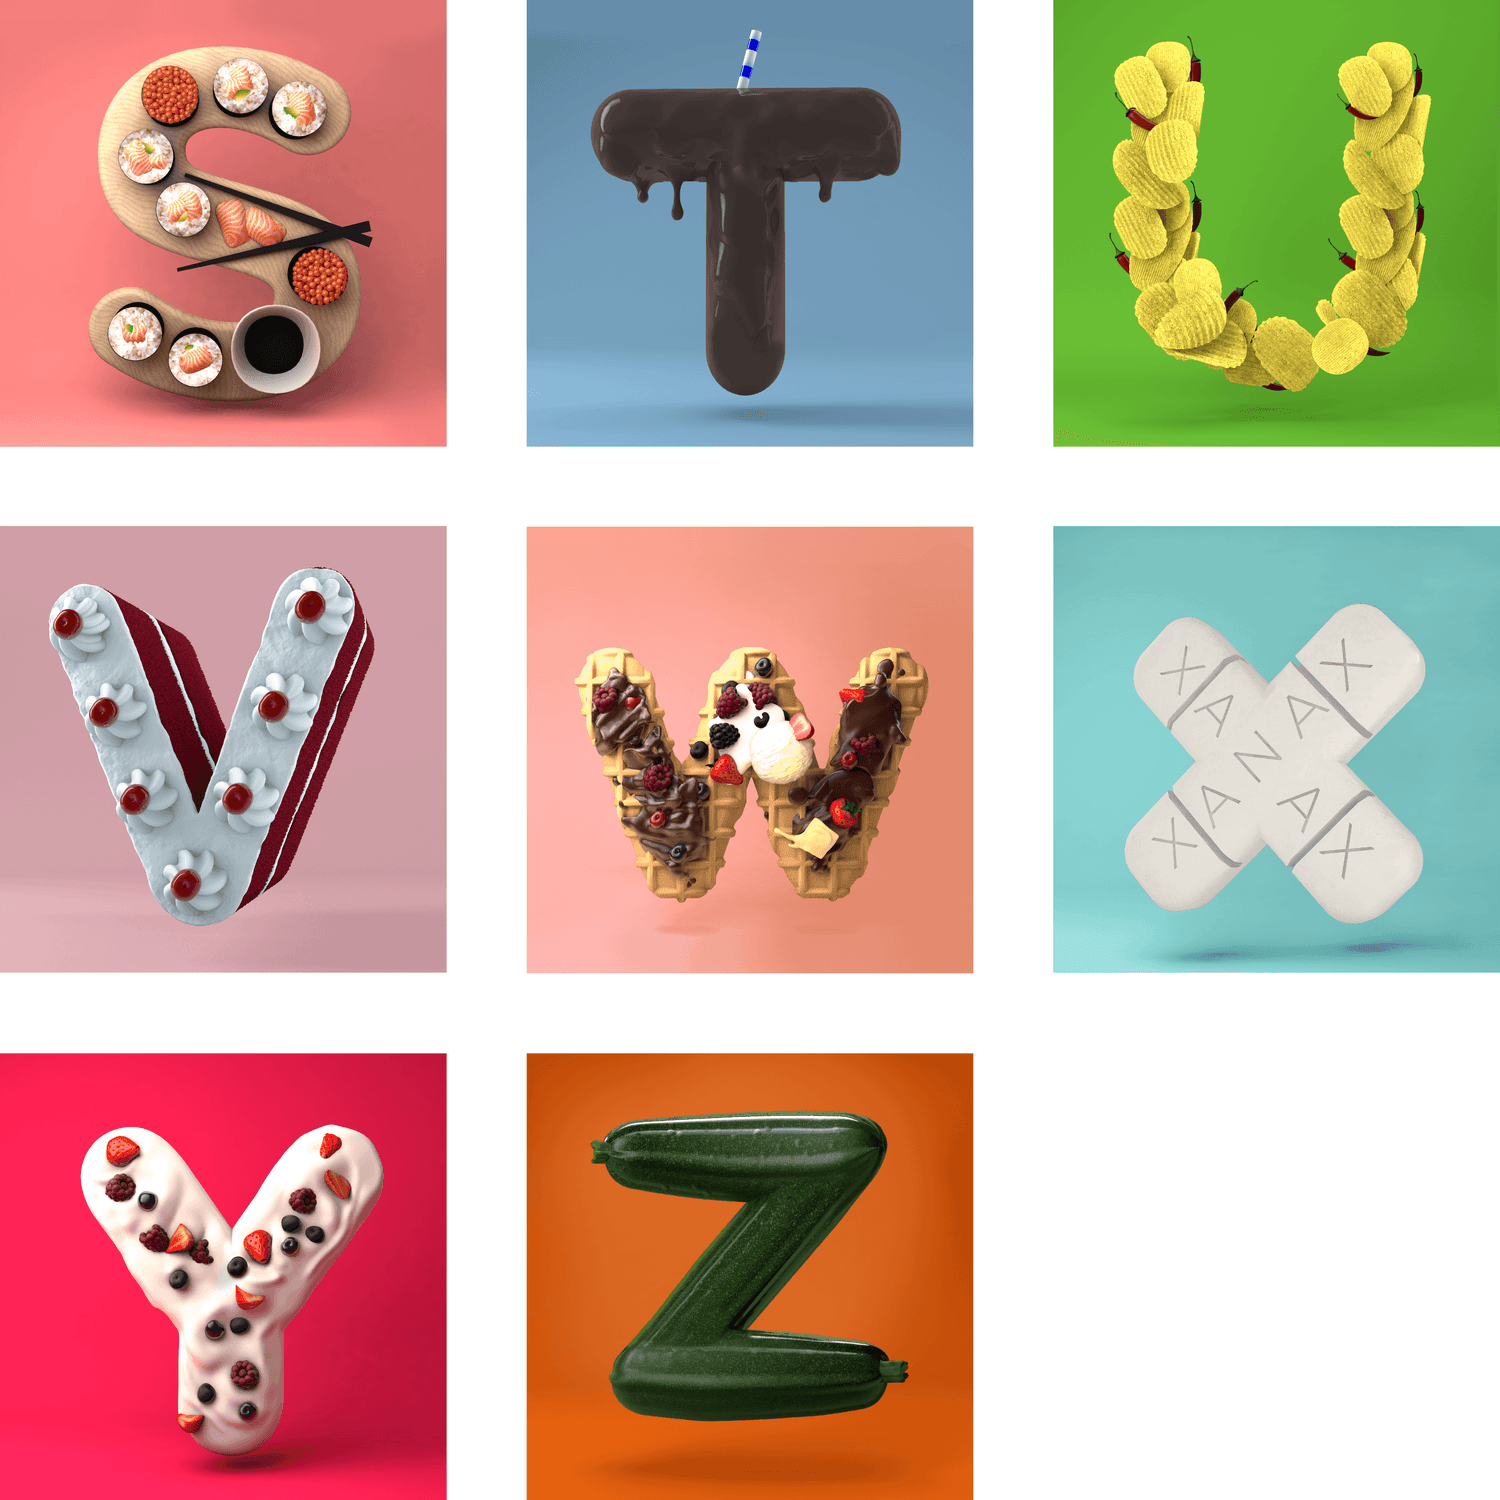 3_alphabets_36dayoftype@3x@3x.png